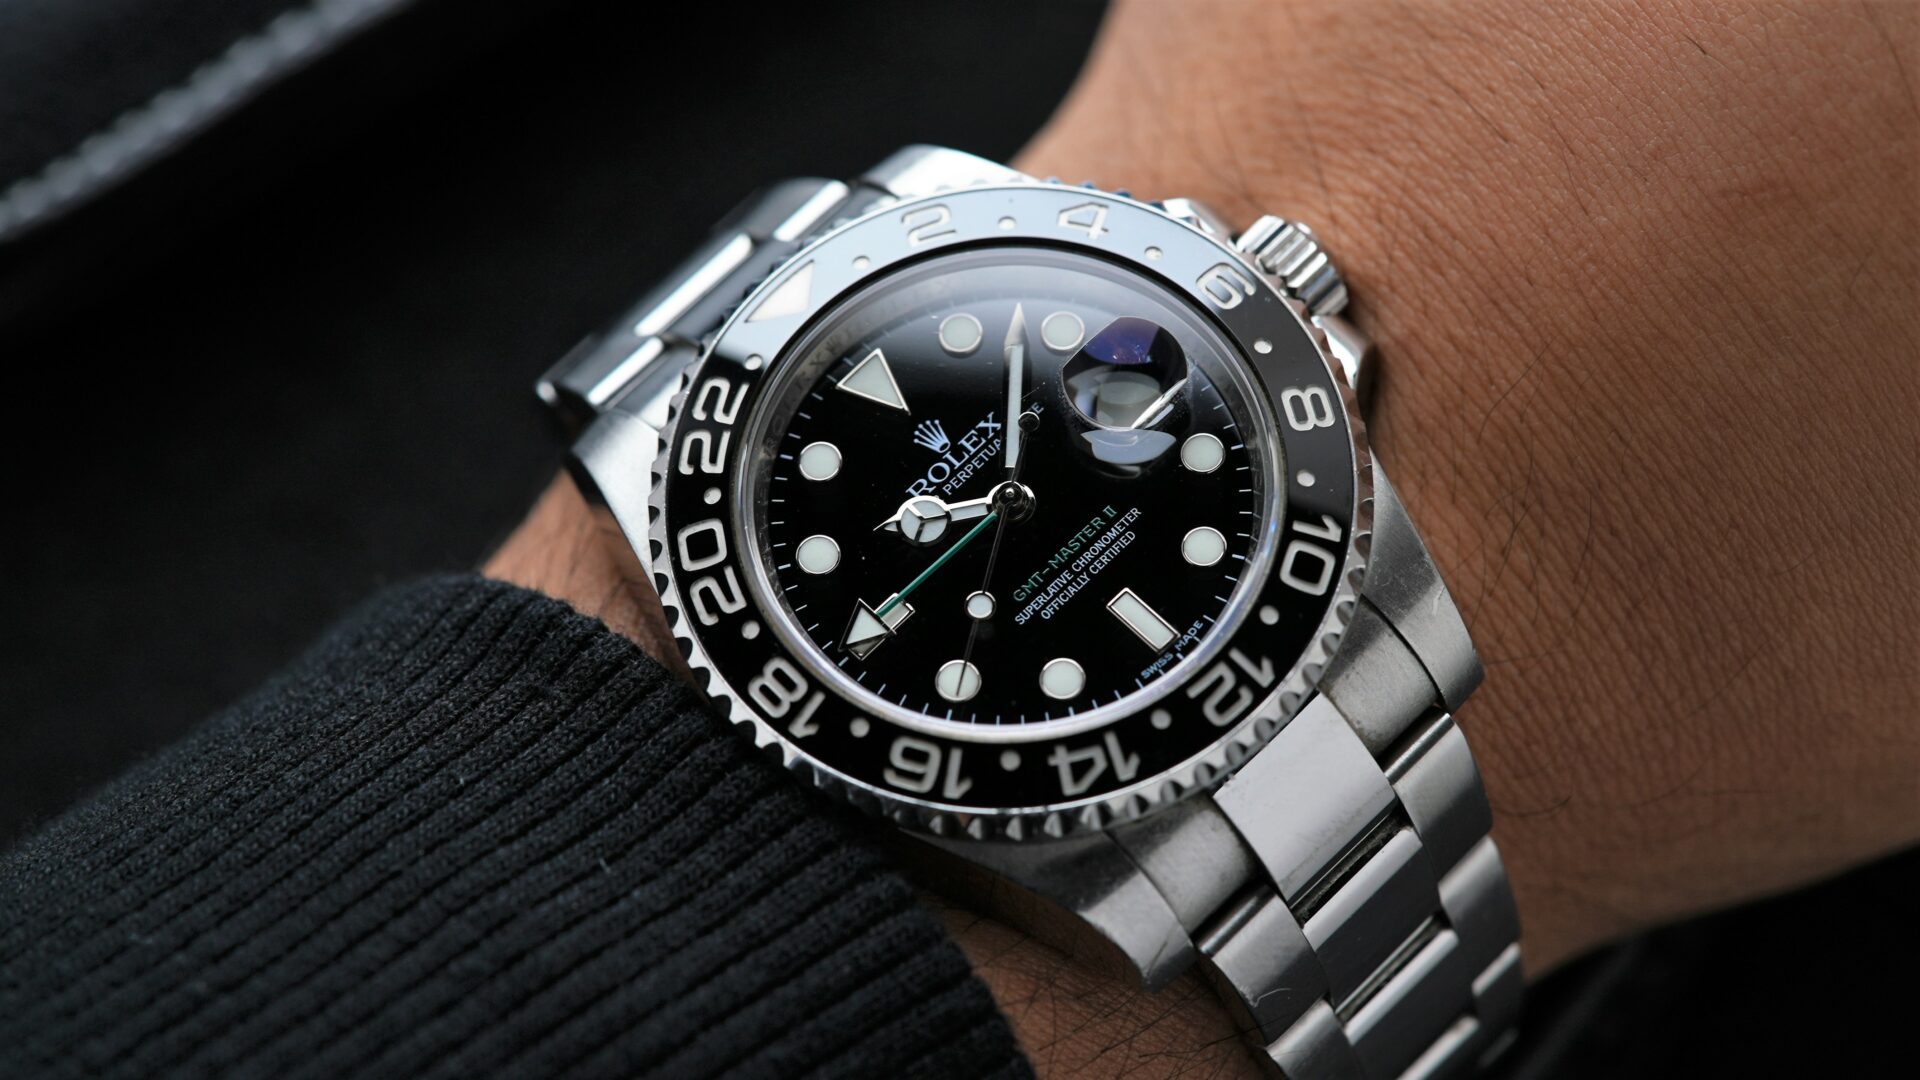 Rolex GMT-Master II Black Discontinued 116710LN wristwatch featured on the wrist.